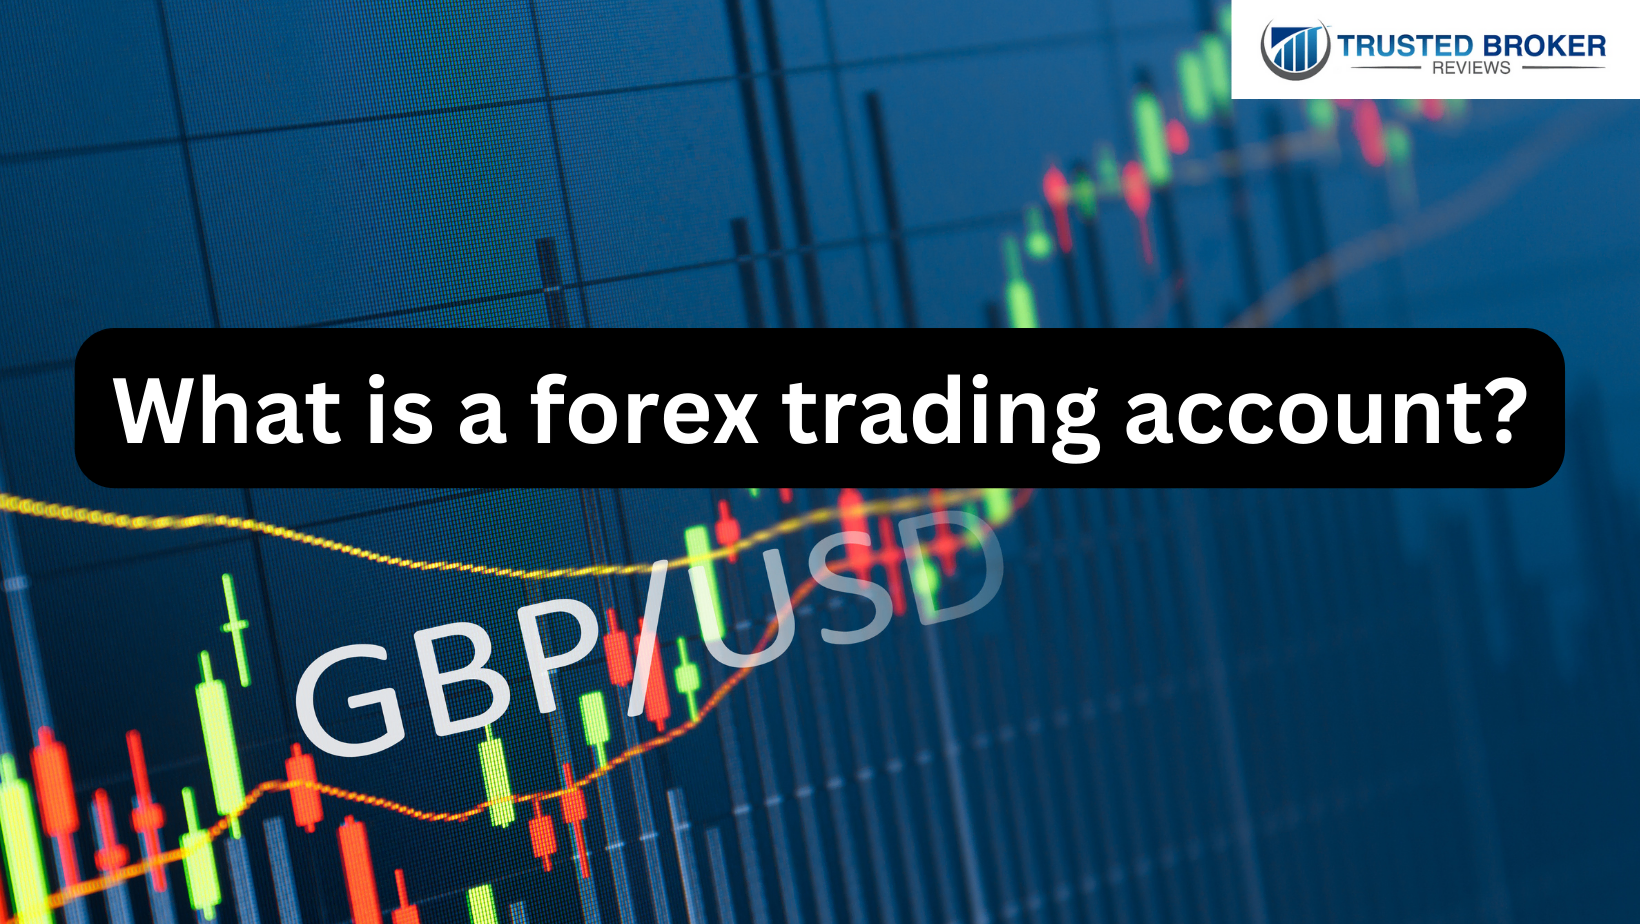 What is a forex trading account?